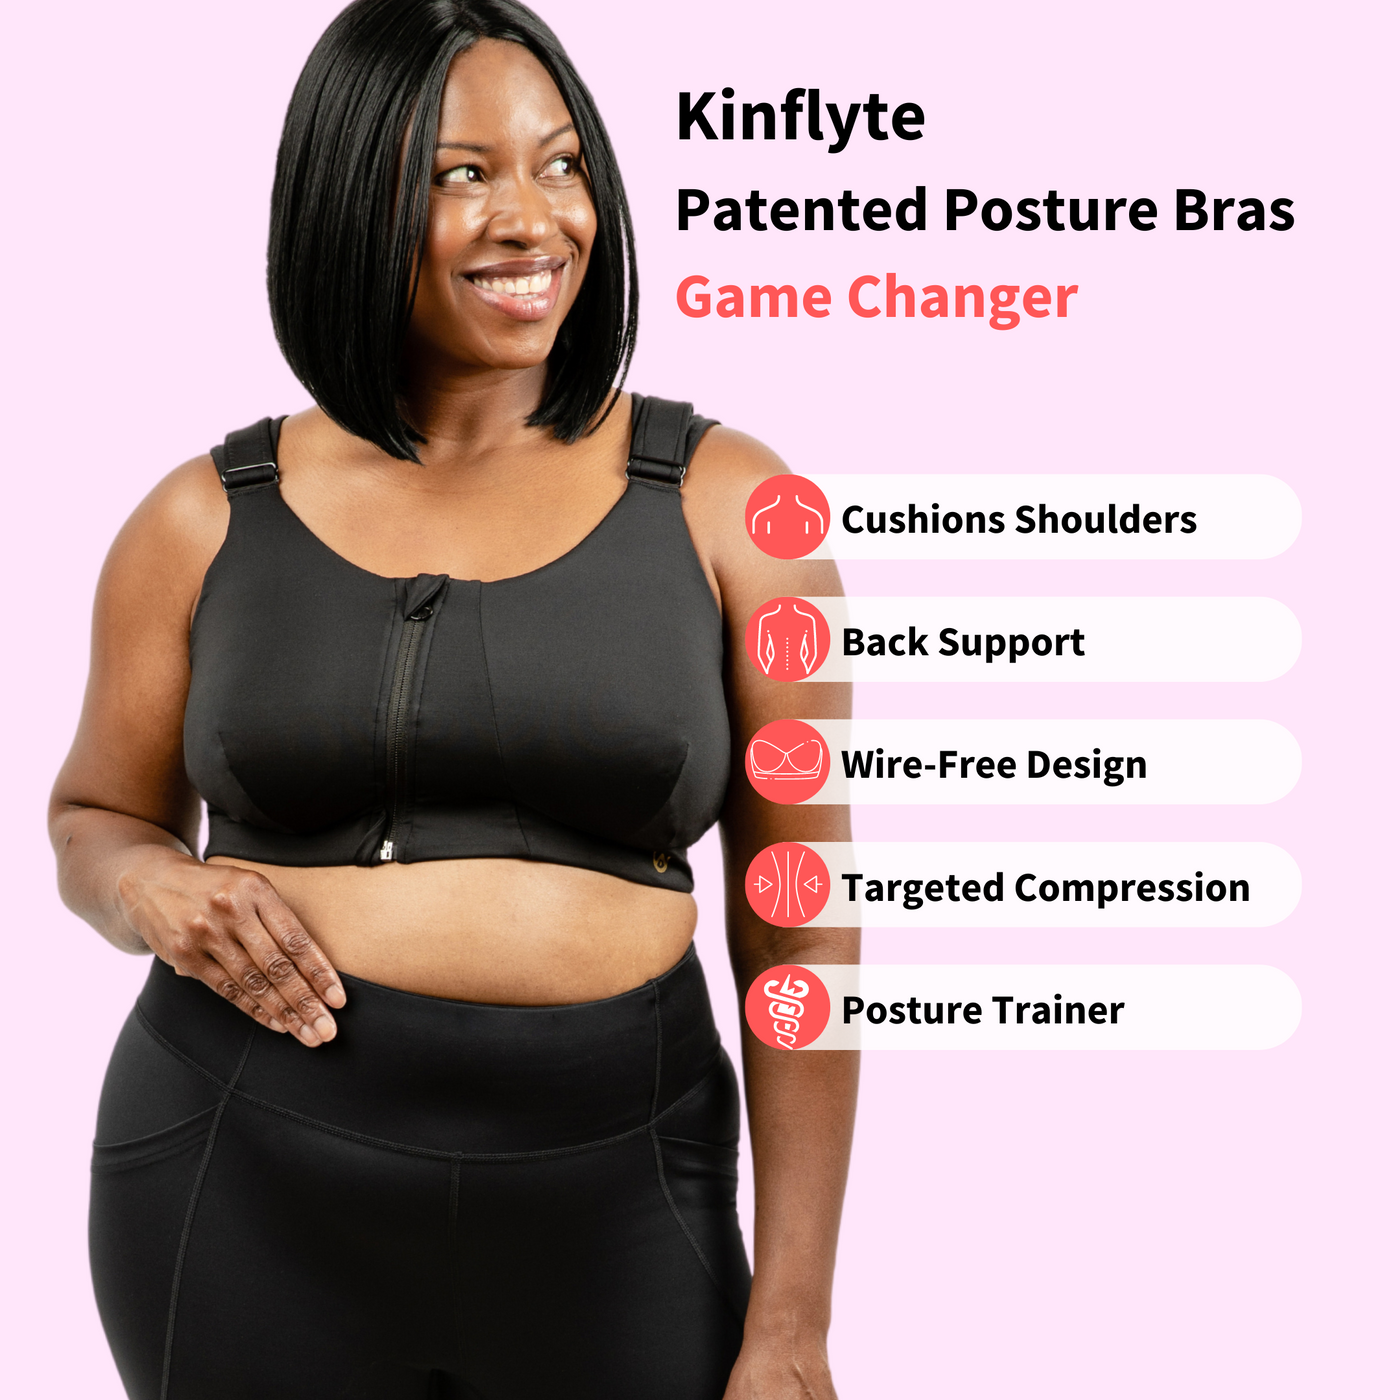 Kinflyte patented posture bras with back support have the most inclusive size range: XS to 7XL, A to M bra cup support. Patented Posture Bra that cushions shoulders, back support, wireless, targeted compression